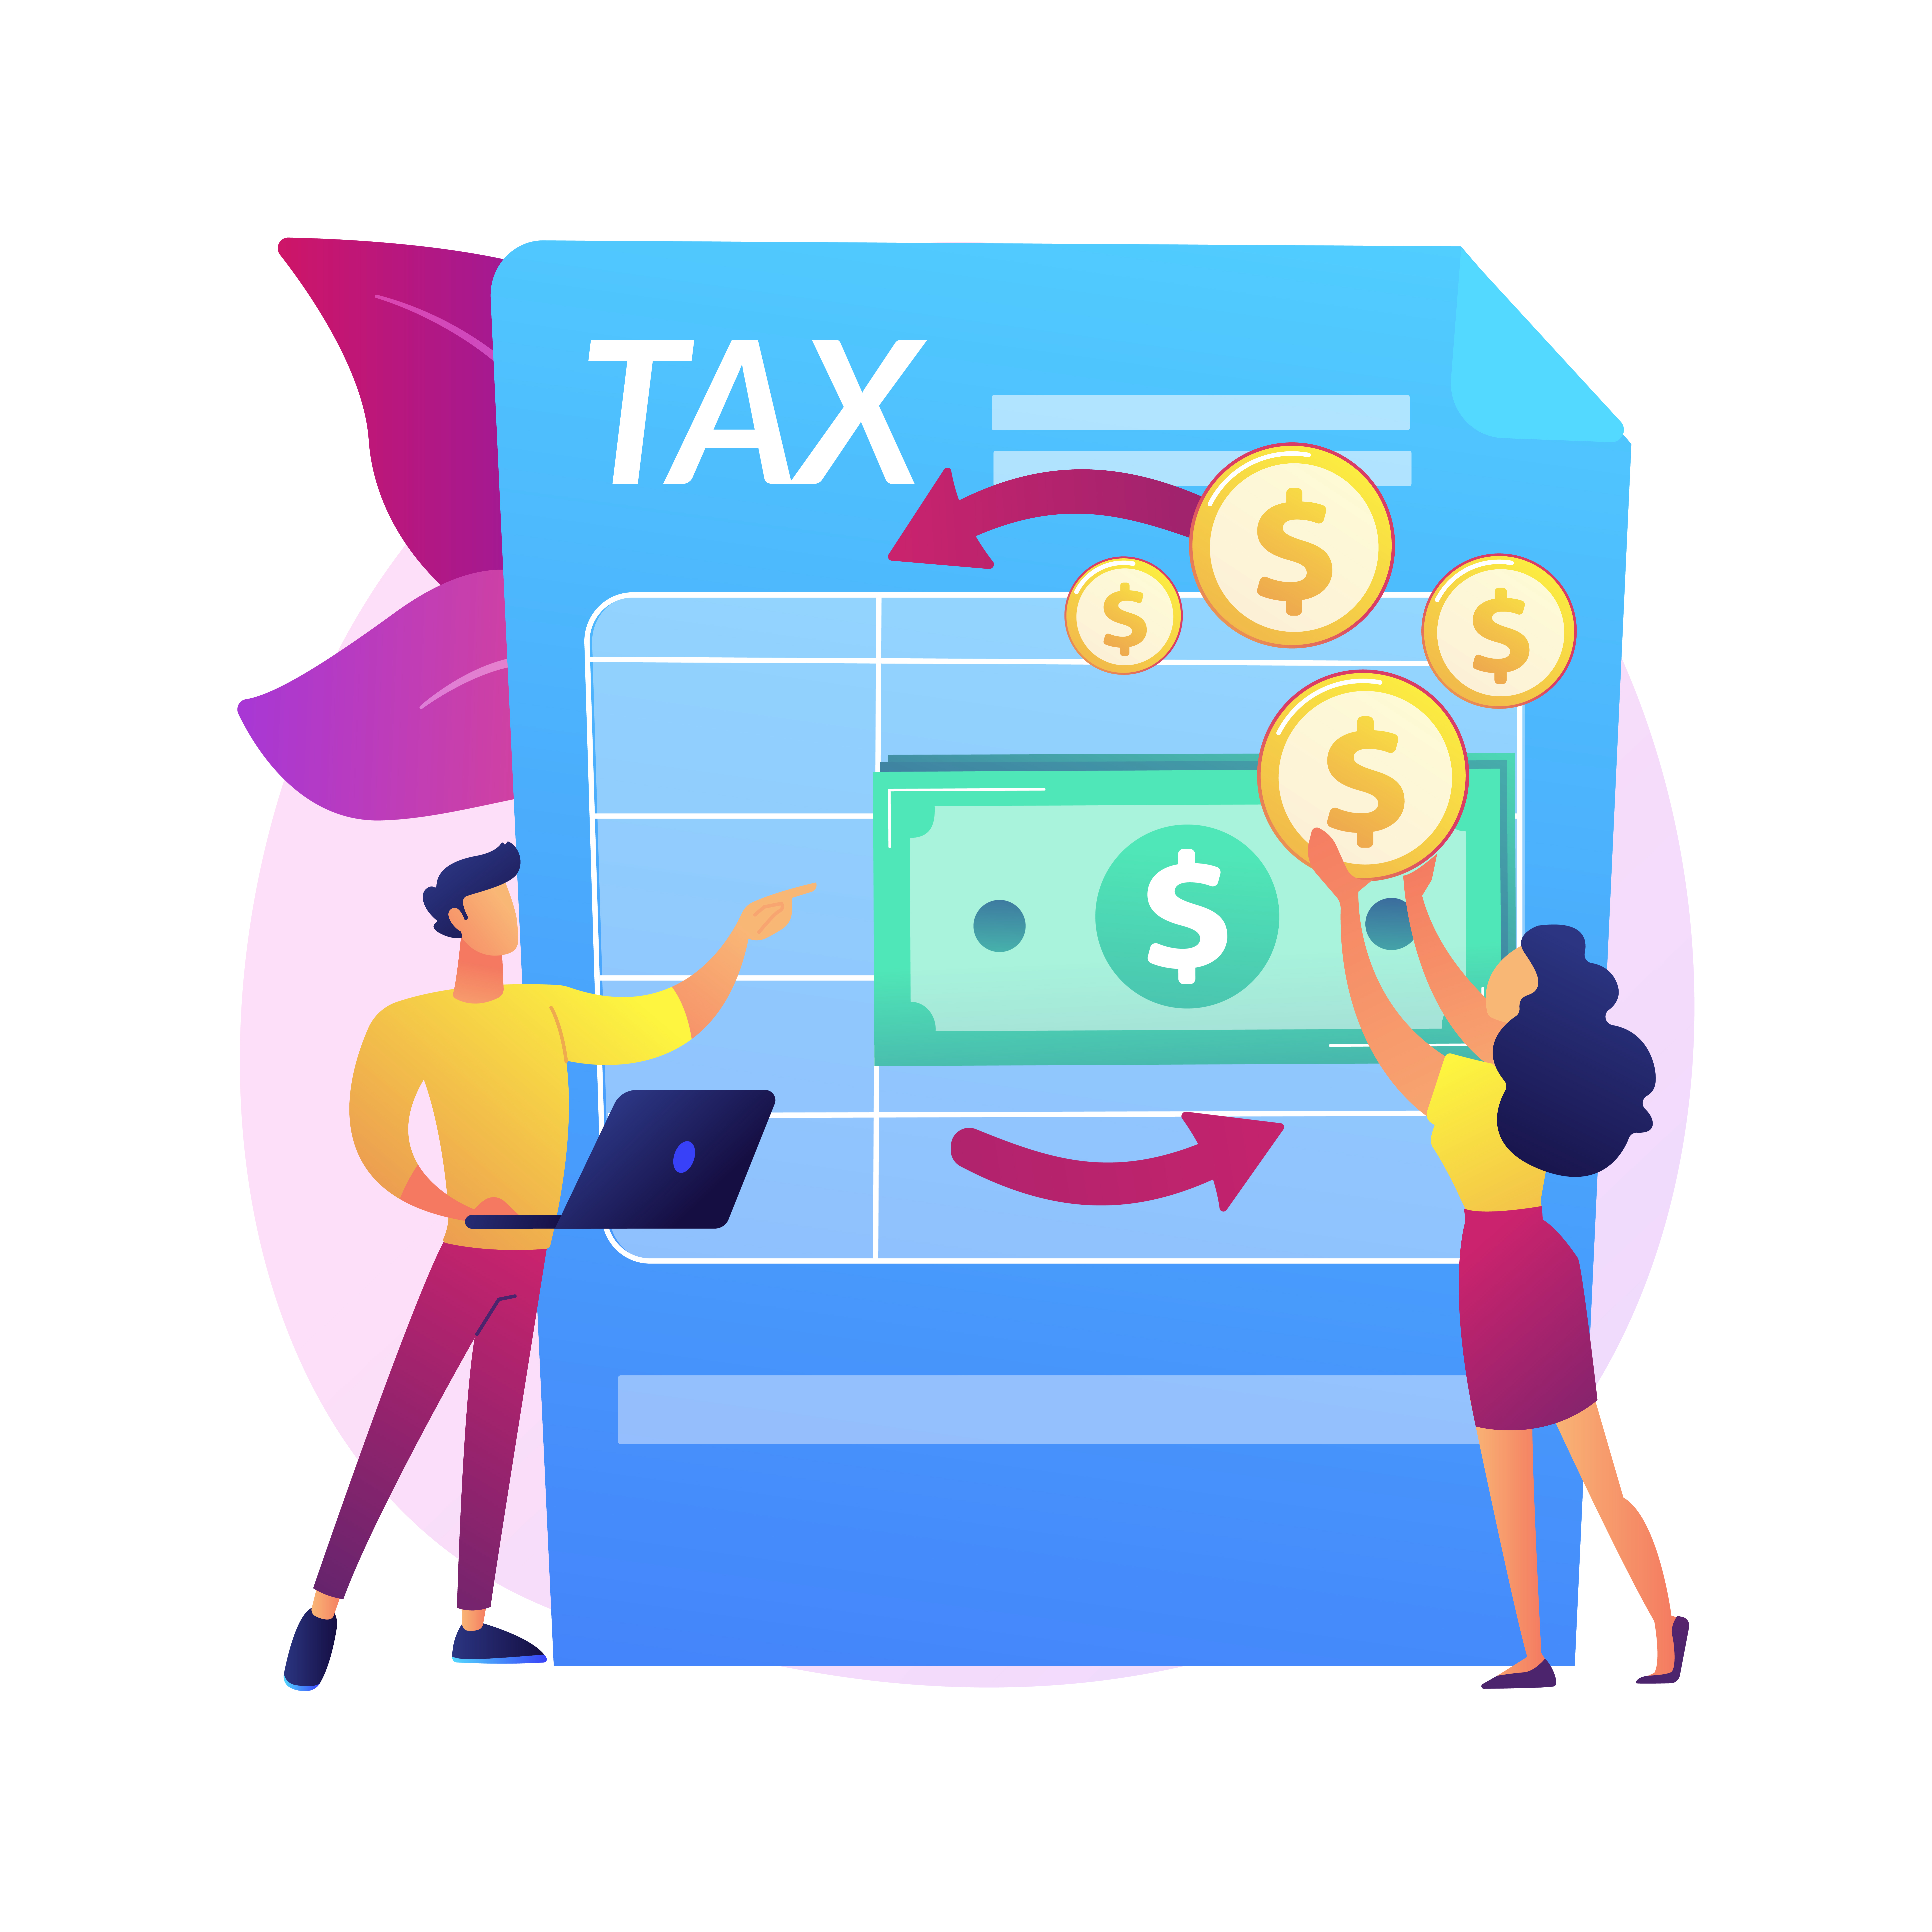 Tax Rate Business Tax Services